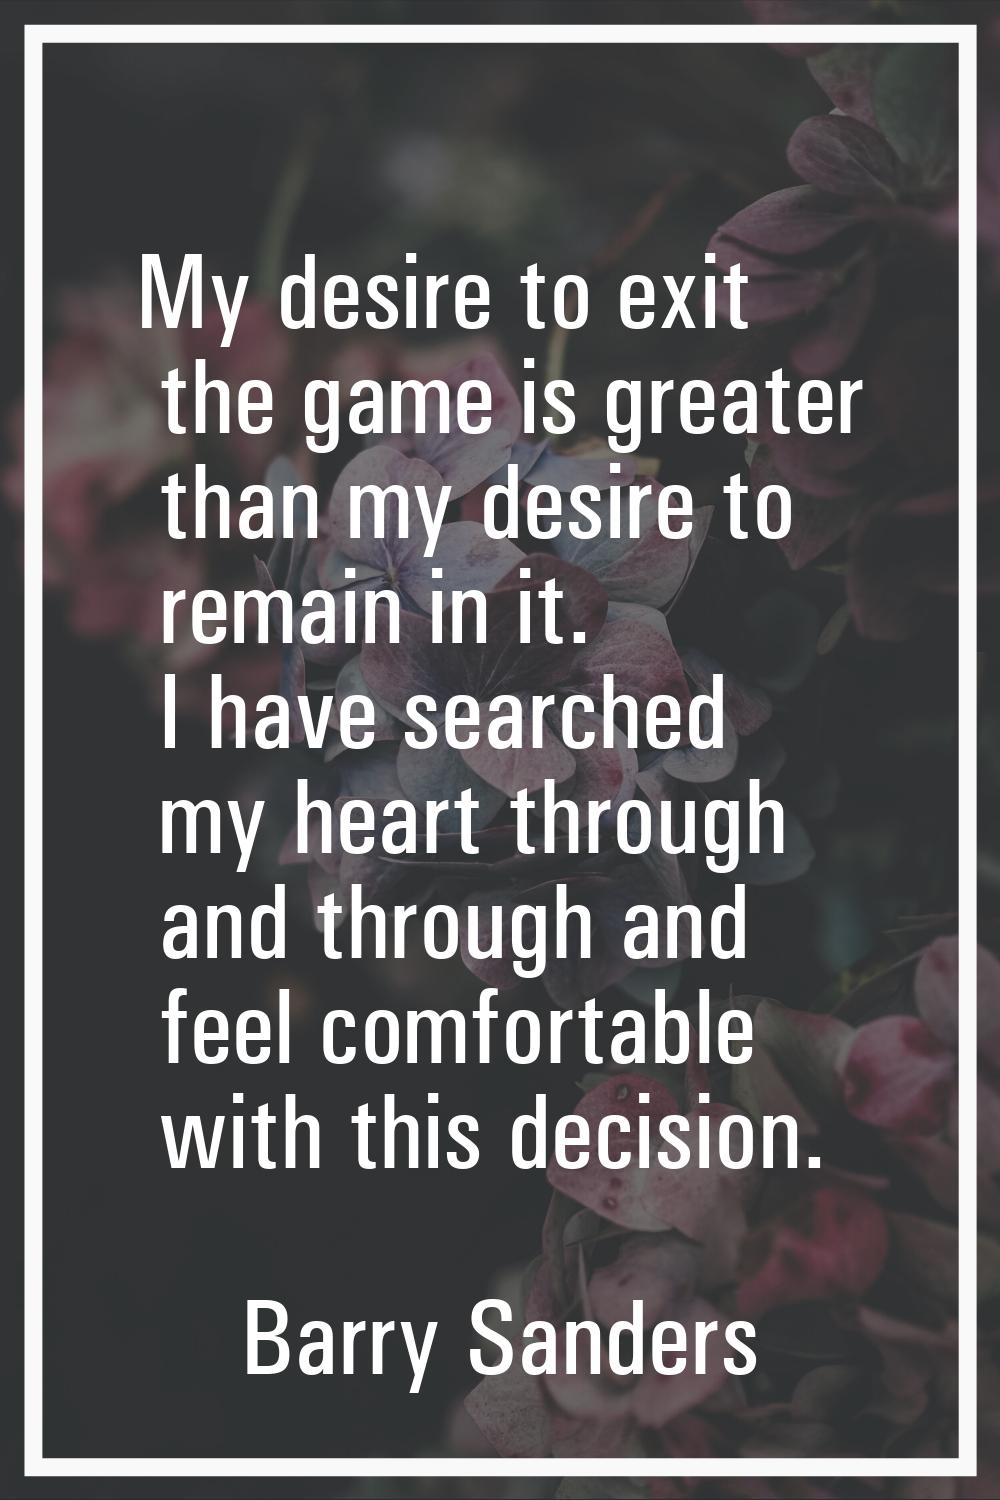 My desire to exit the game is greater than my desire to remain in it. I have searched my heart thro